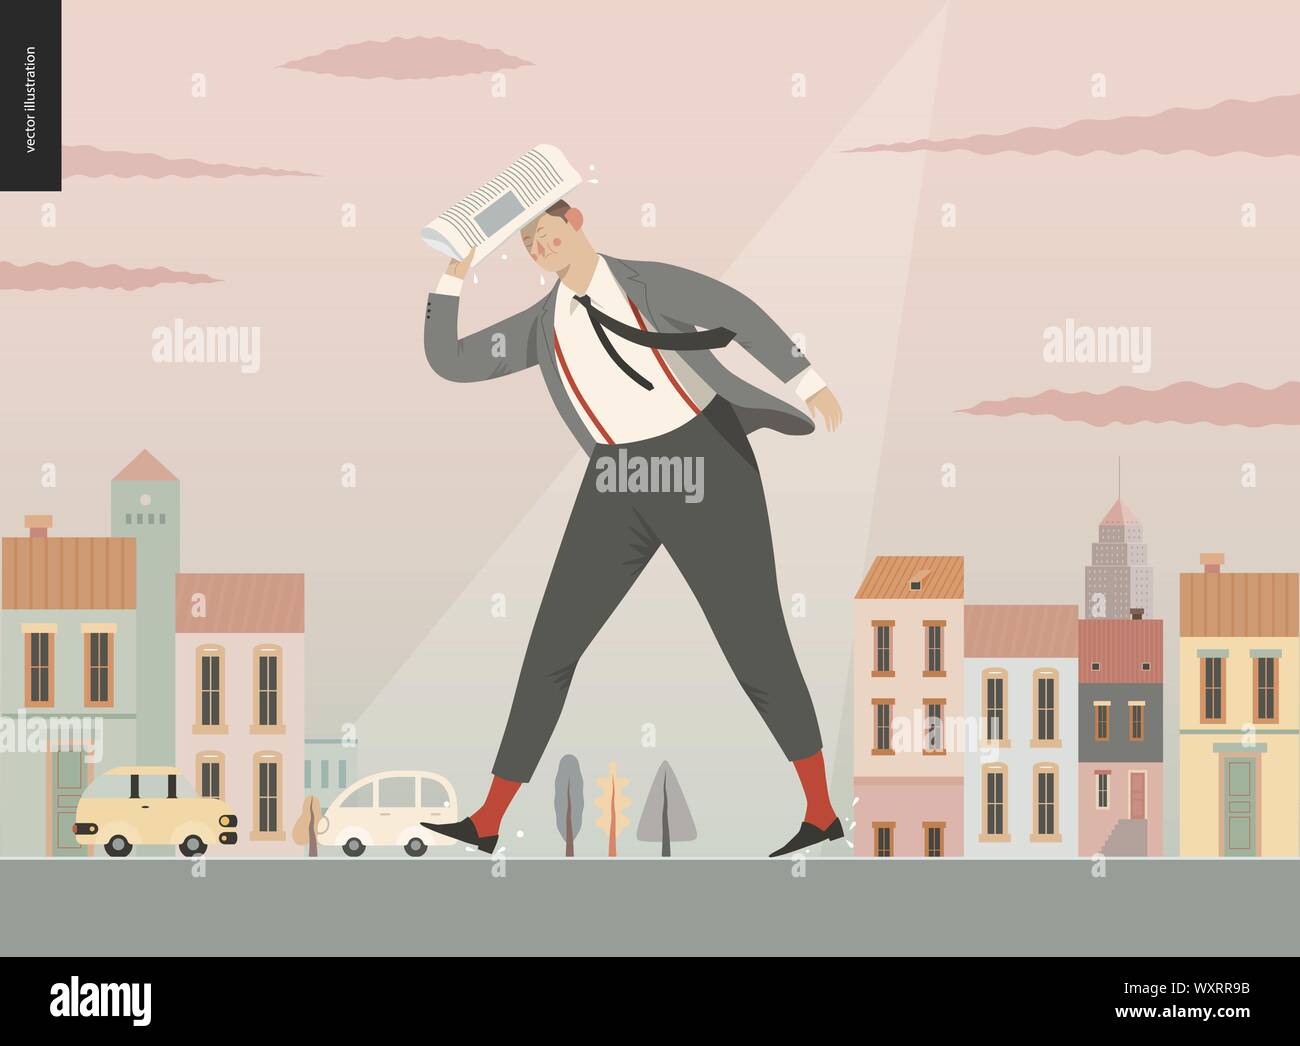 Rain - running businessman -modern flat vector concept illustration of an adult man wearing suit and tie, with a newspaper, running under the rain in Stock Vector